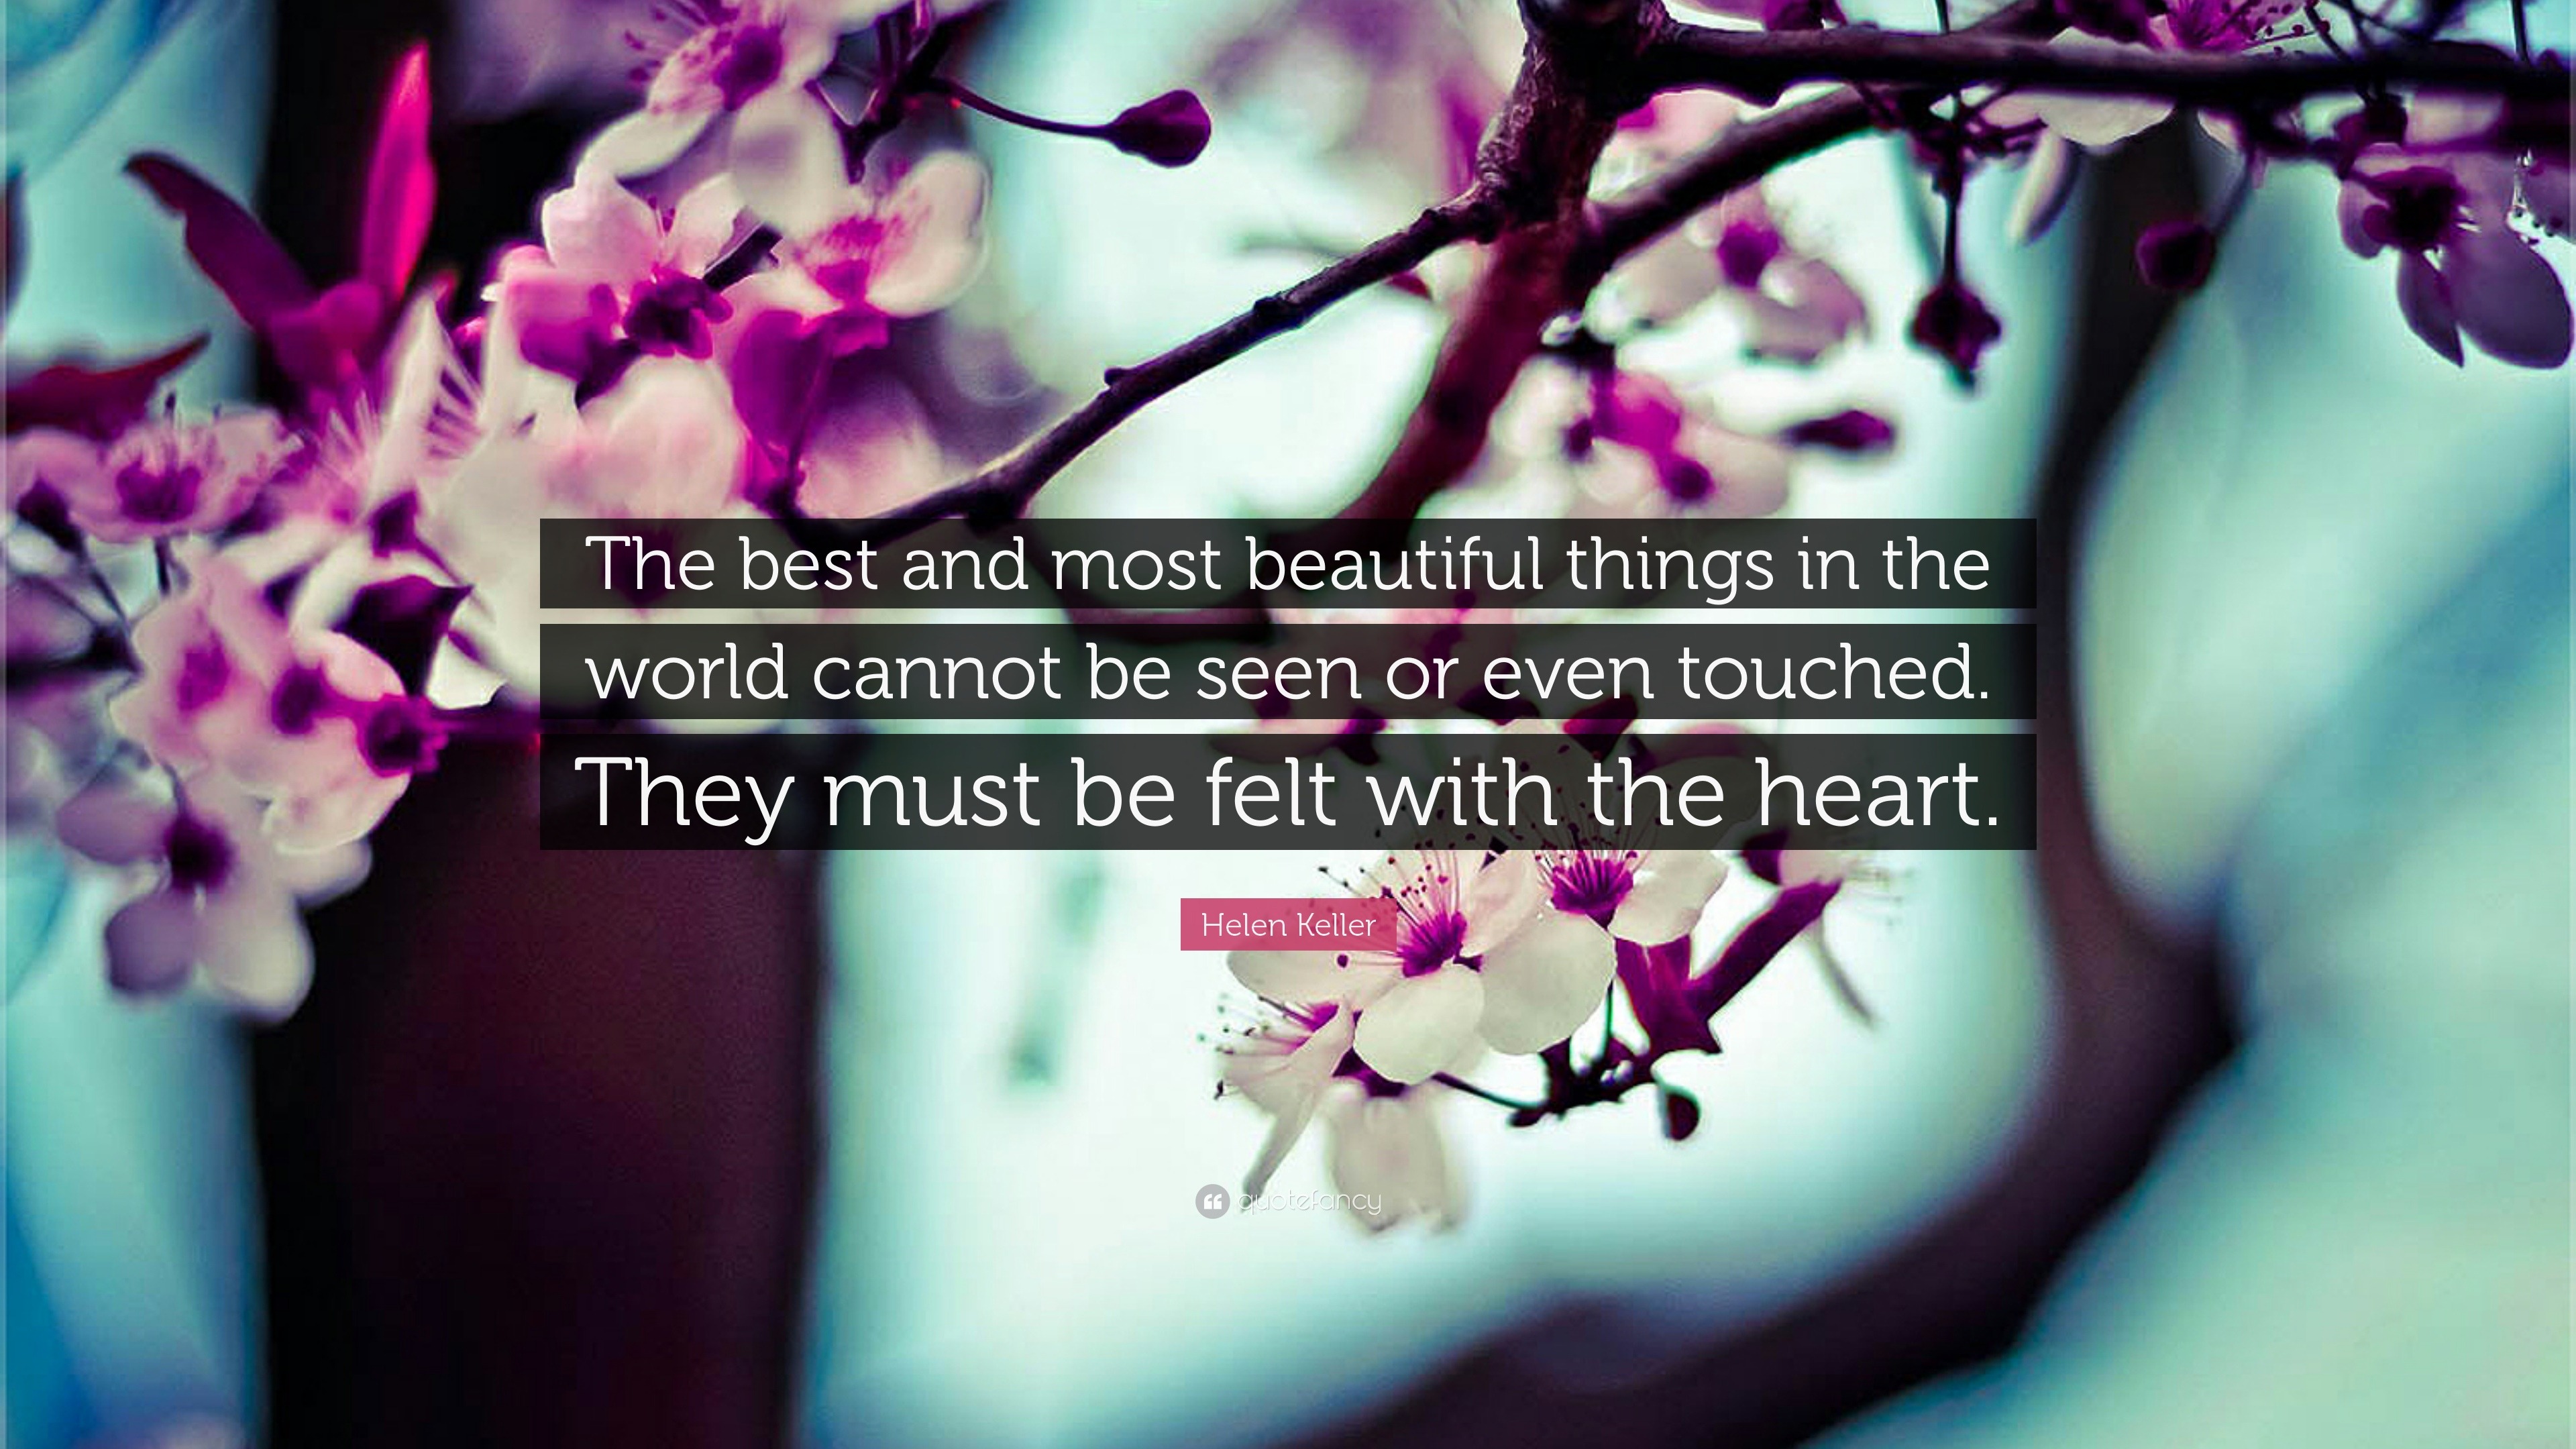 Helen Keller Quote “The best and most beautiful things in the world cannot be